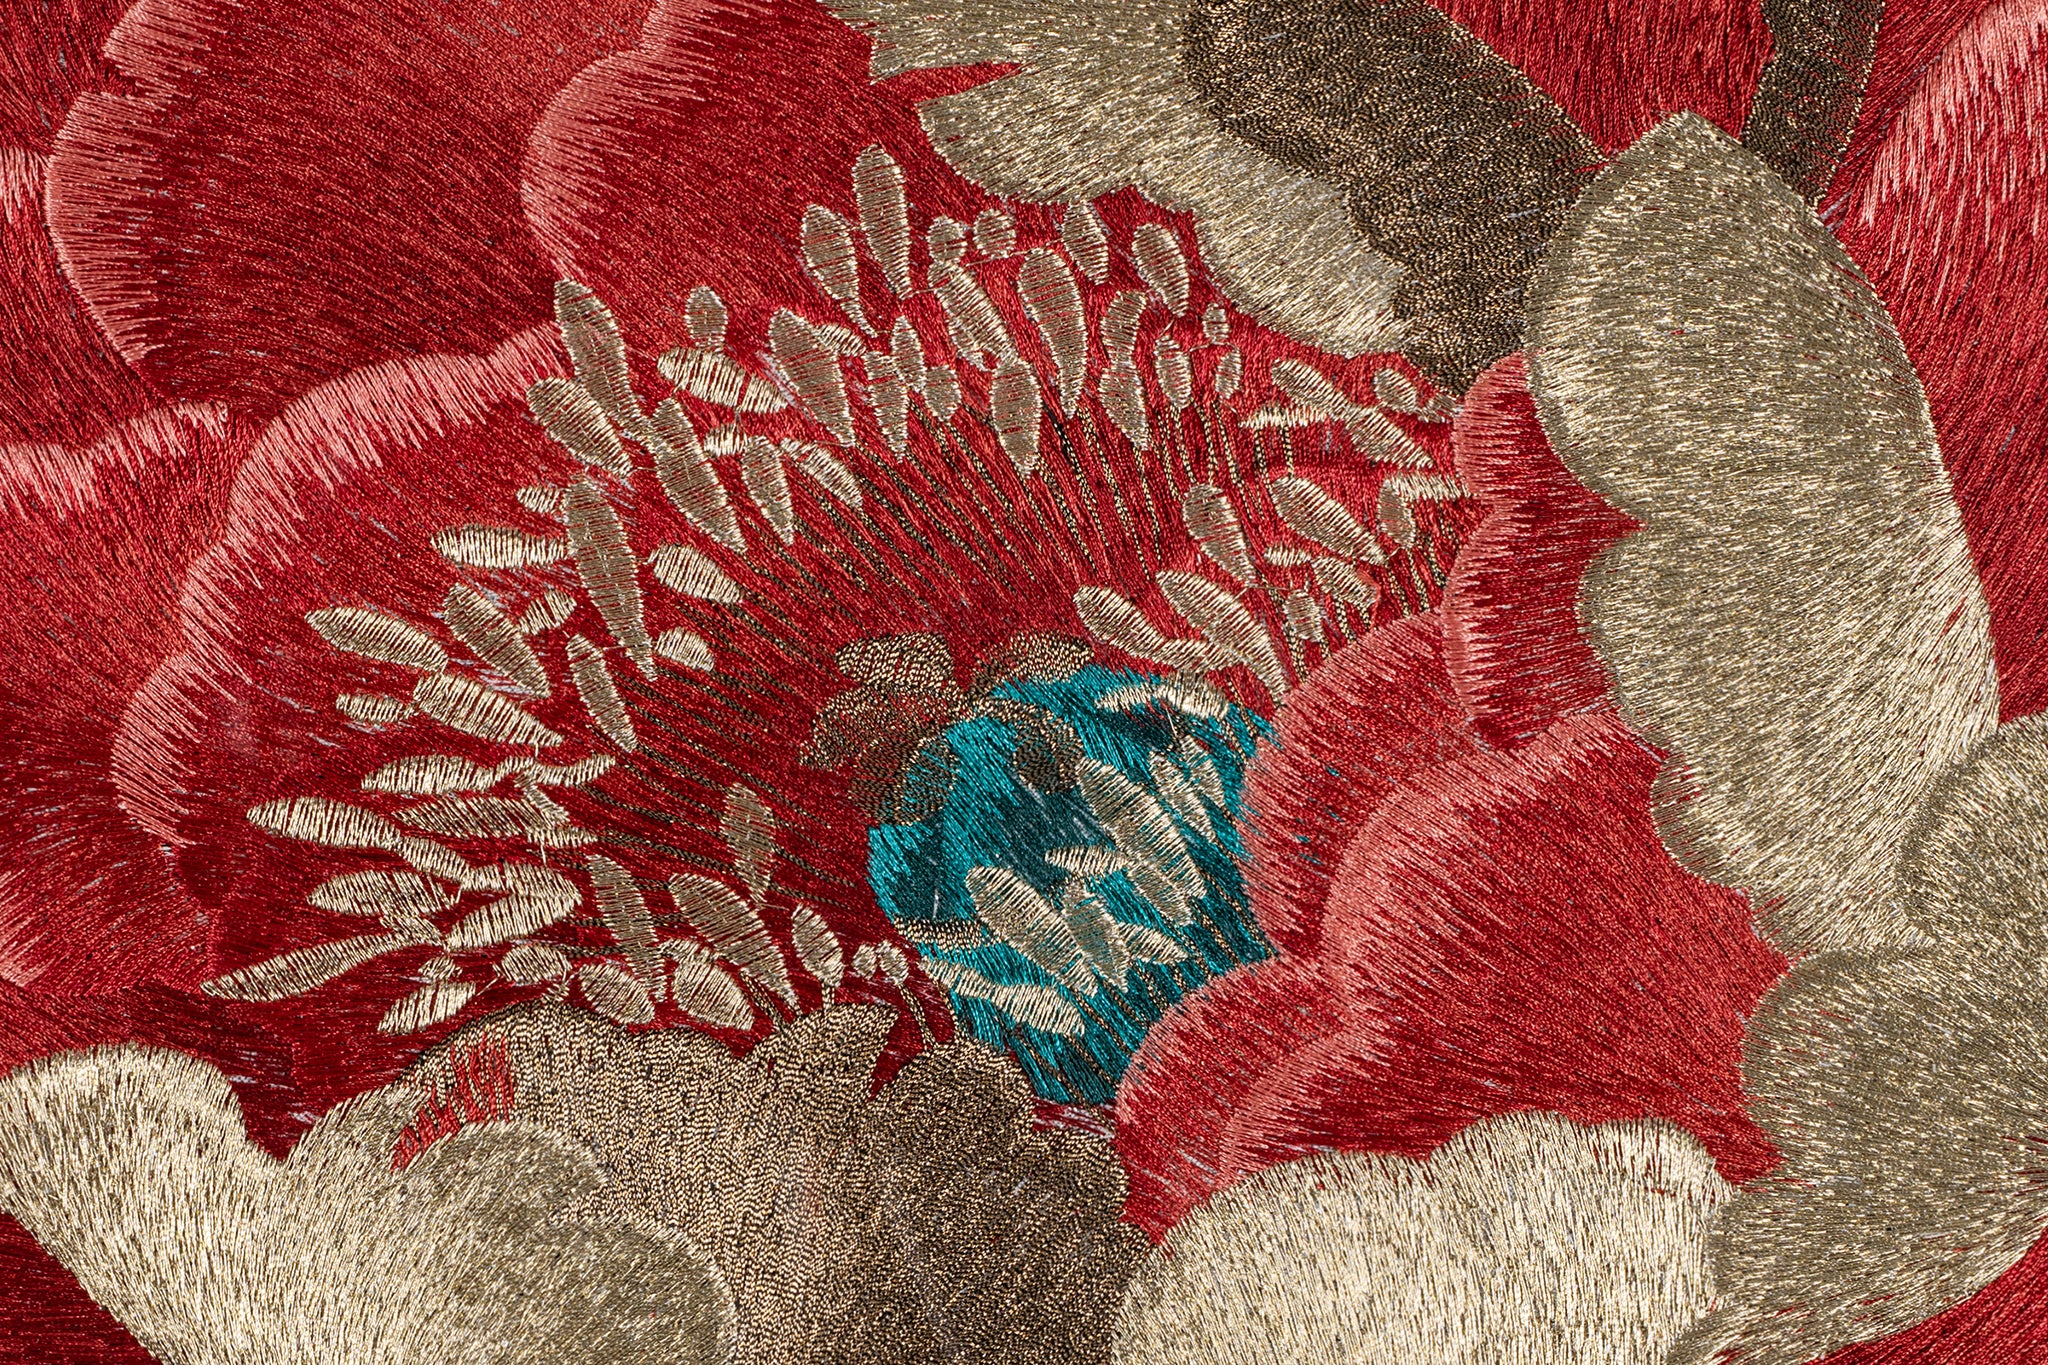 The bright red peony core on the imperial fan embroidery art, the flower core is shown in gold and fluorescent green.